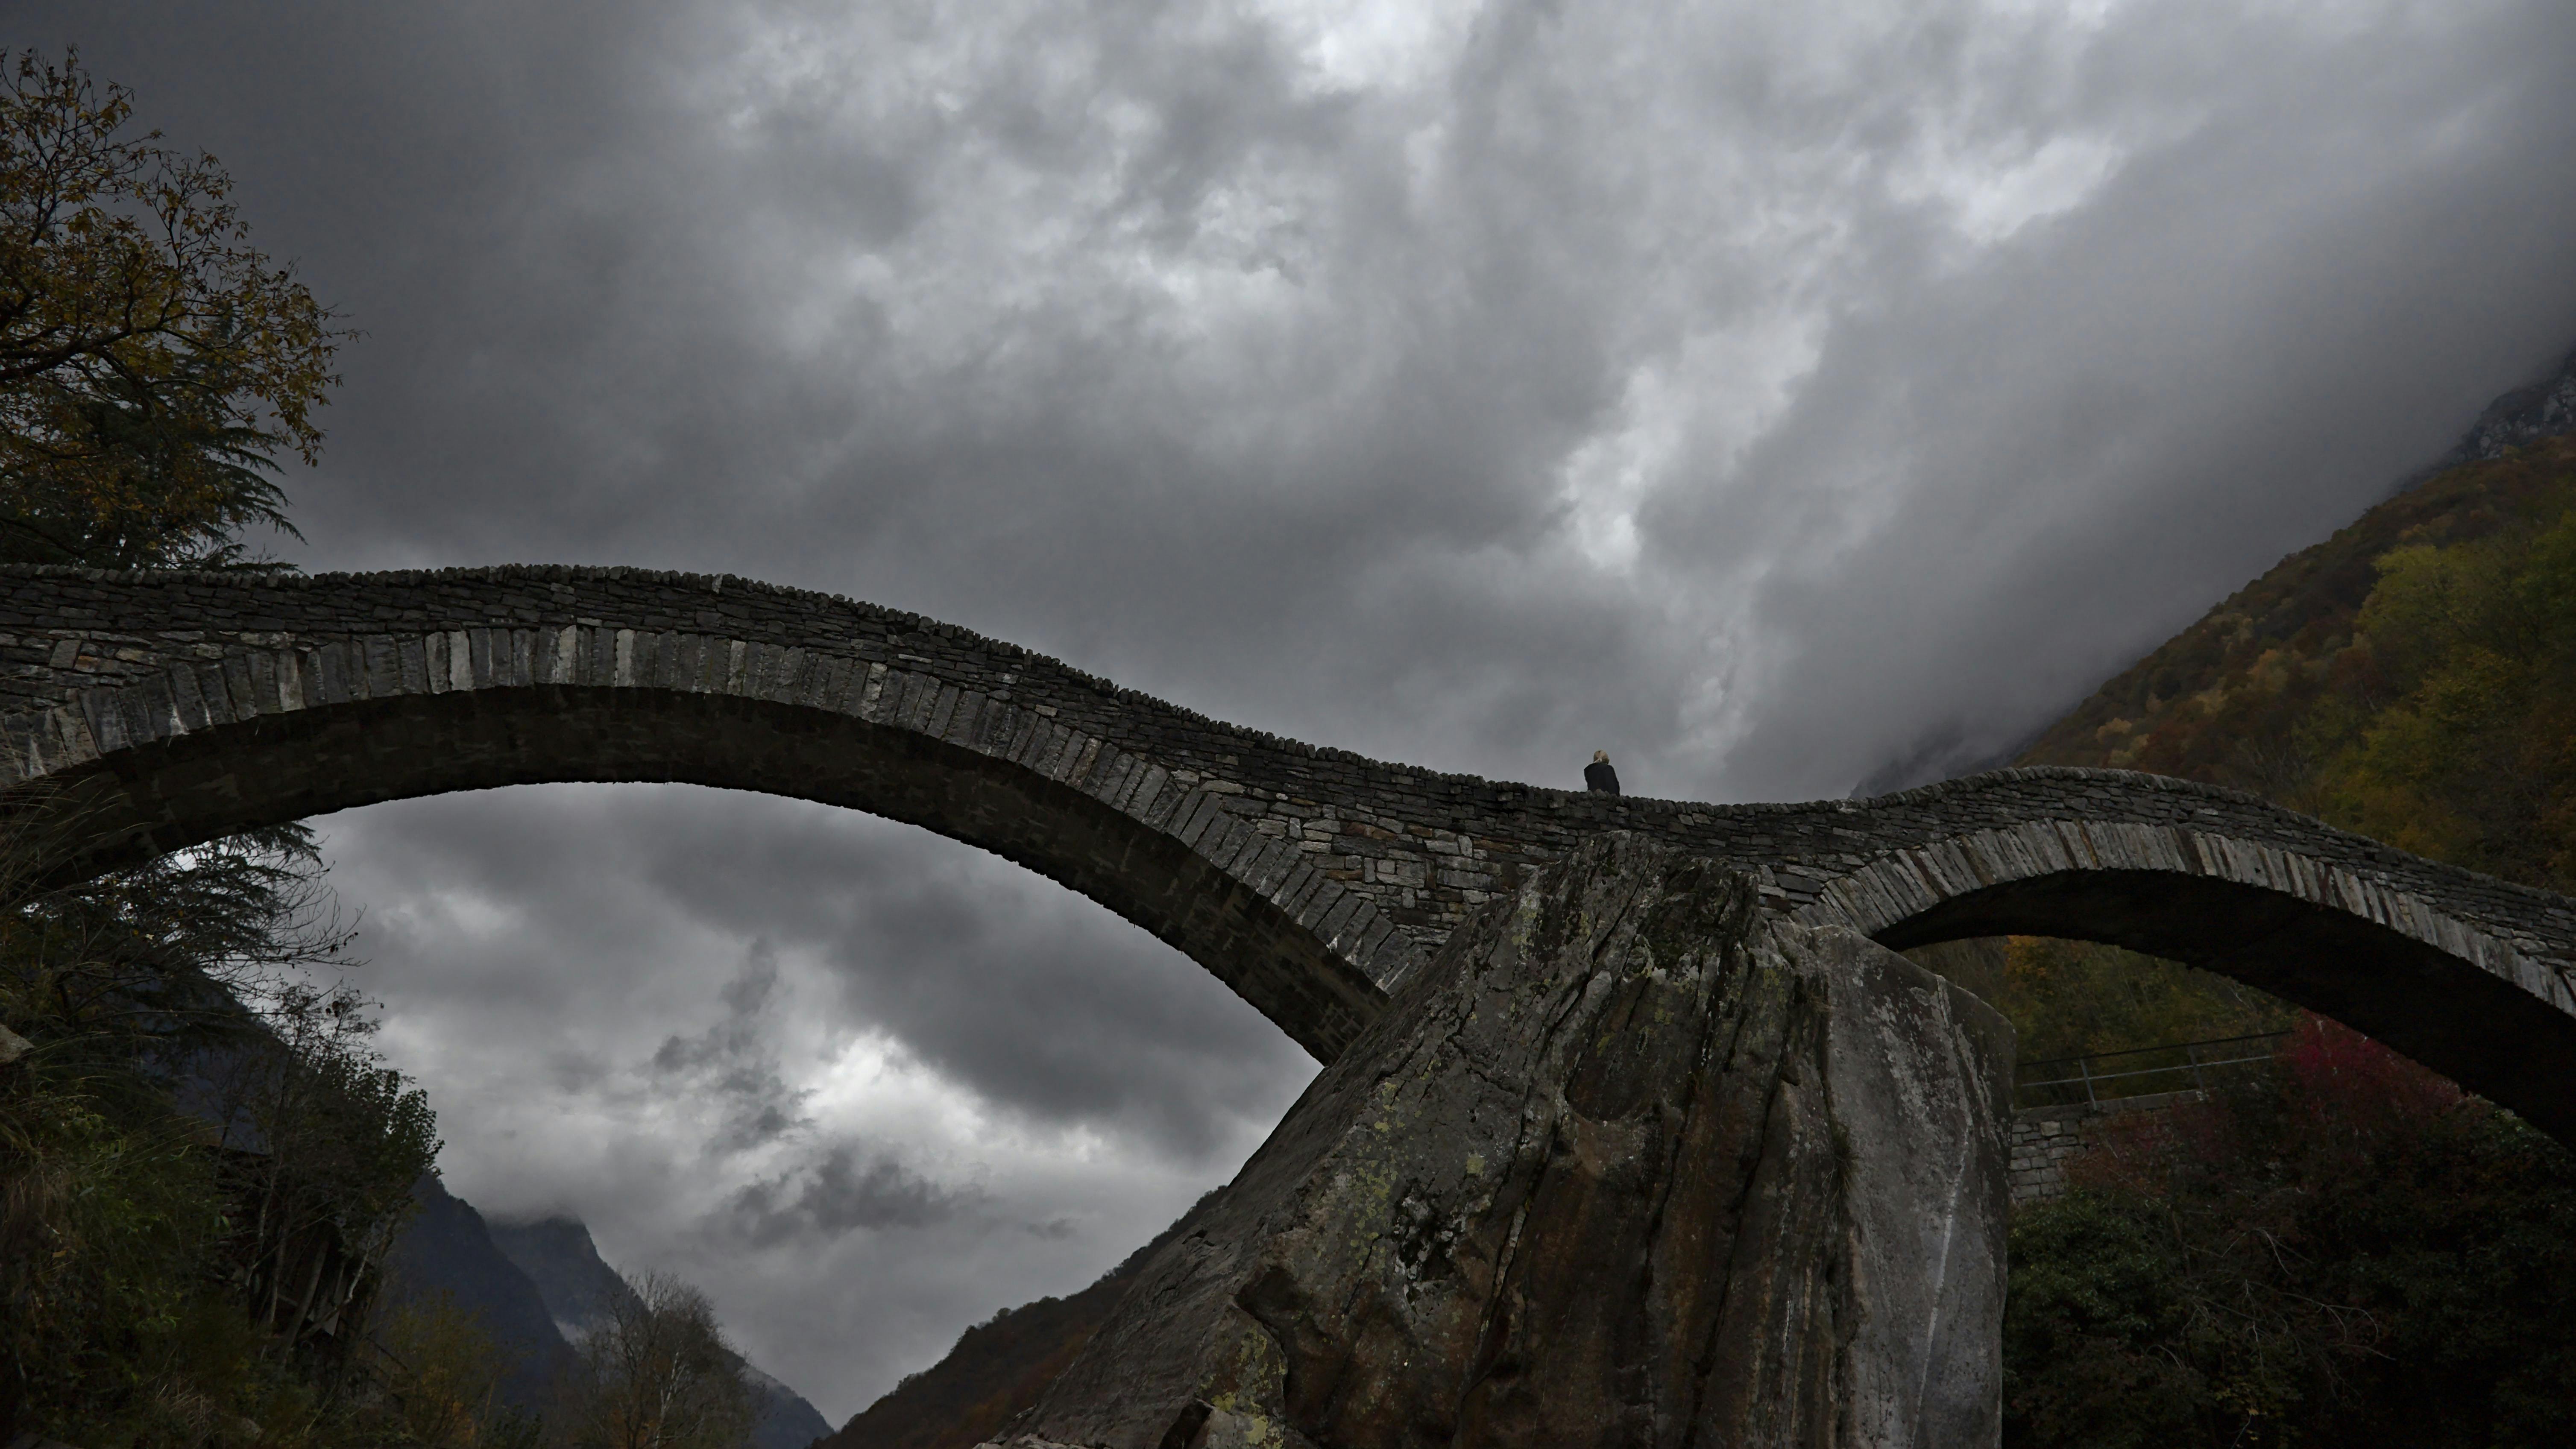 Looking up at a bridge against an ominous, cloudy, grey sky